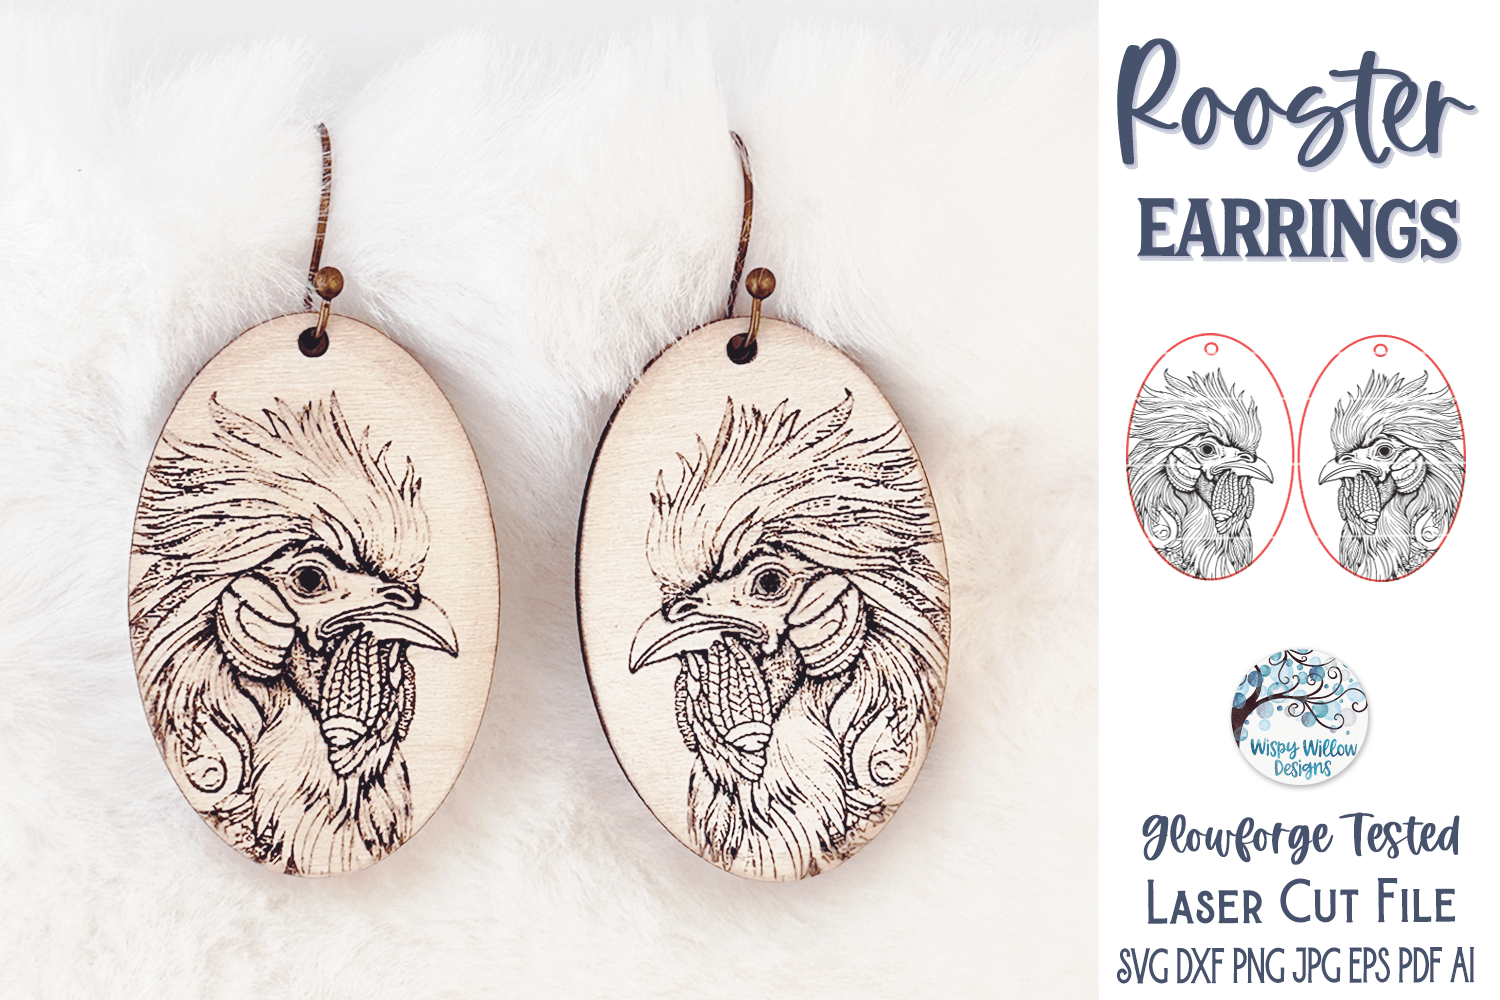 Rooster Earrings SVG File for Glowforge or Laser Cutter Wispy Willow Designs Company